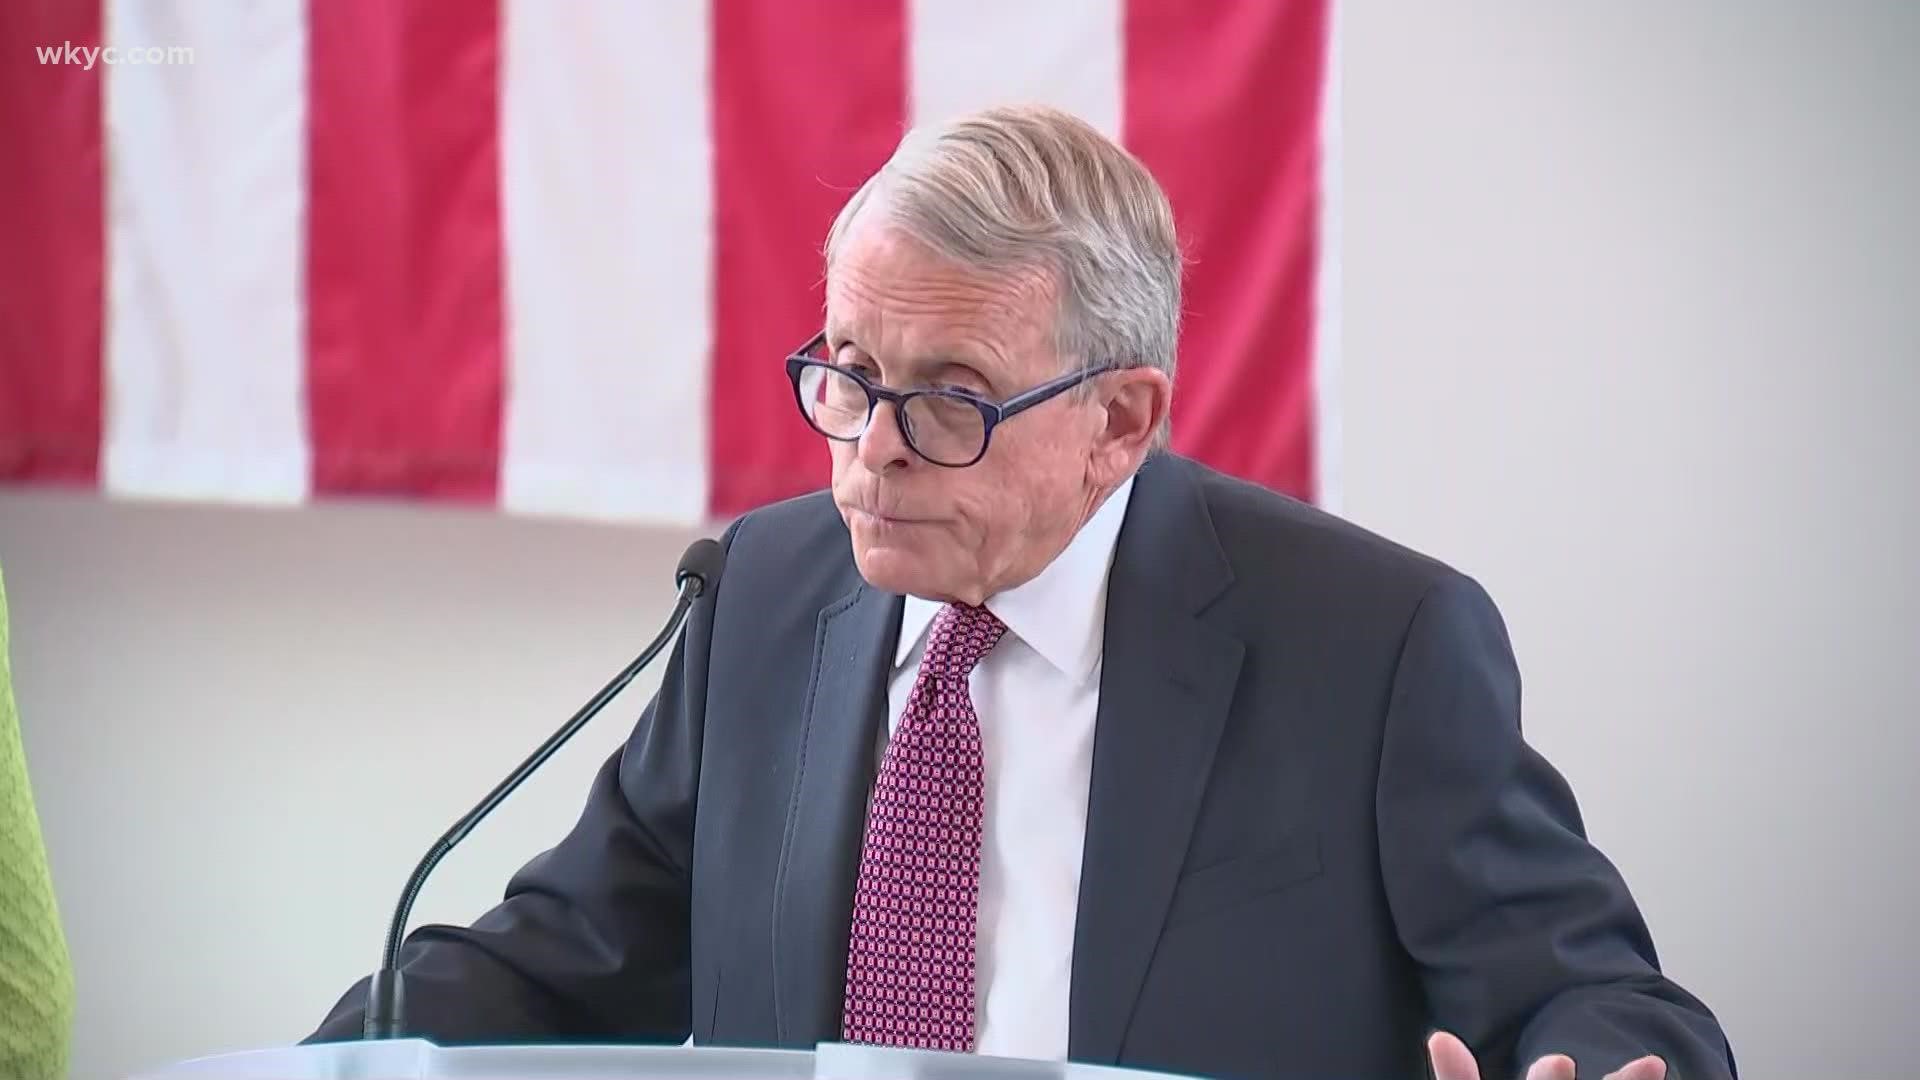 Gov. DeWine says the state has been allotted 347,000 doses in the first week once ages 5-11 are approved to get the COVID vaccine.